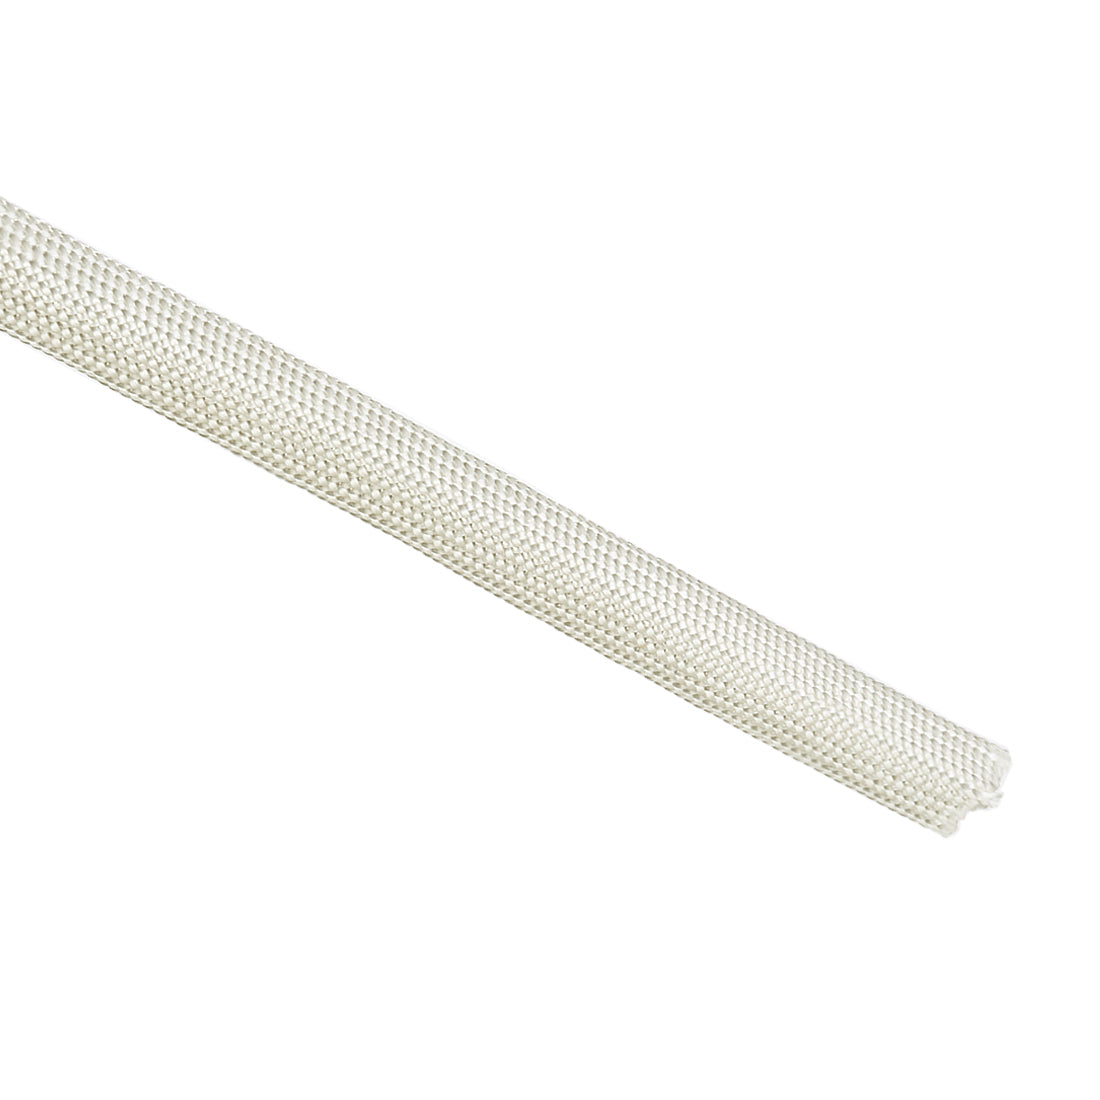 uxcell Uxcell Insulation Cable Protector, 9.8Ft-7mm High TEMP Fiberglass Sleeve White